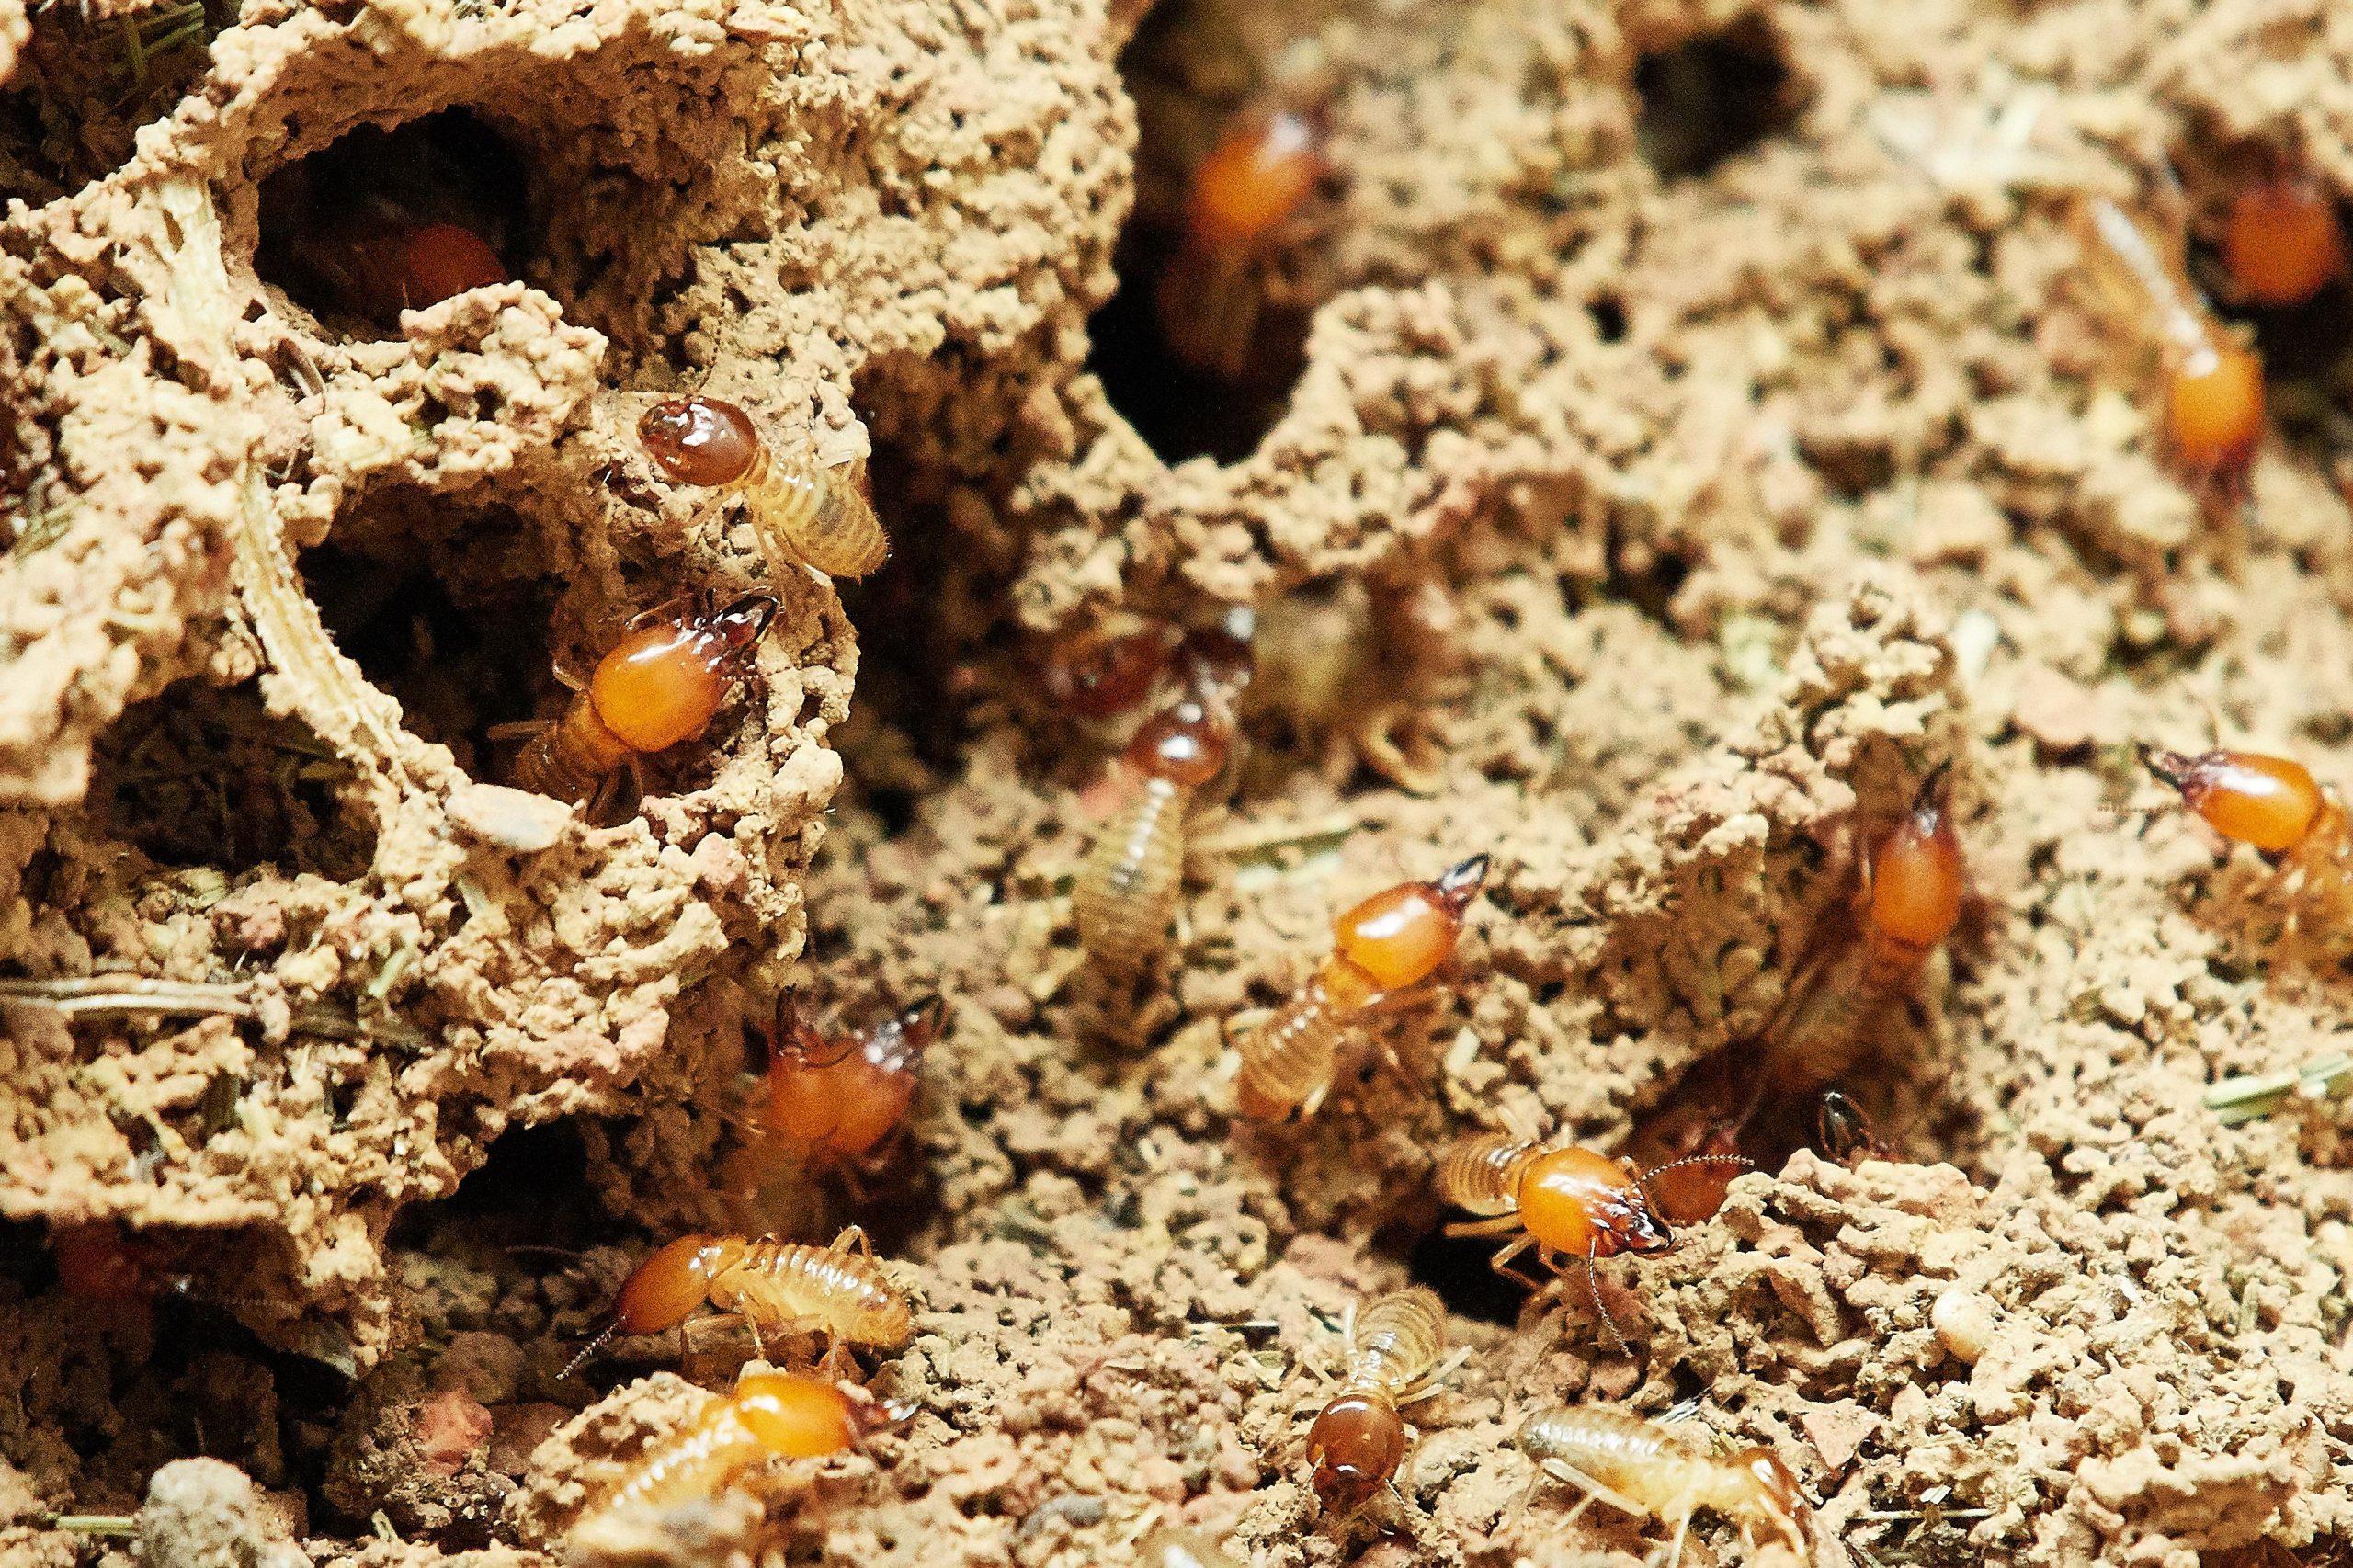 Termites Making a Meal of Your Home?